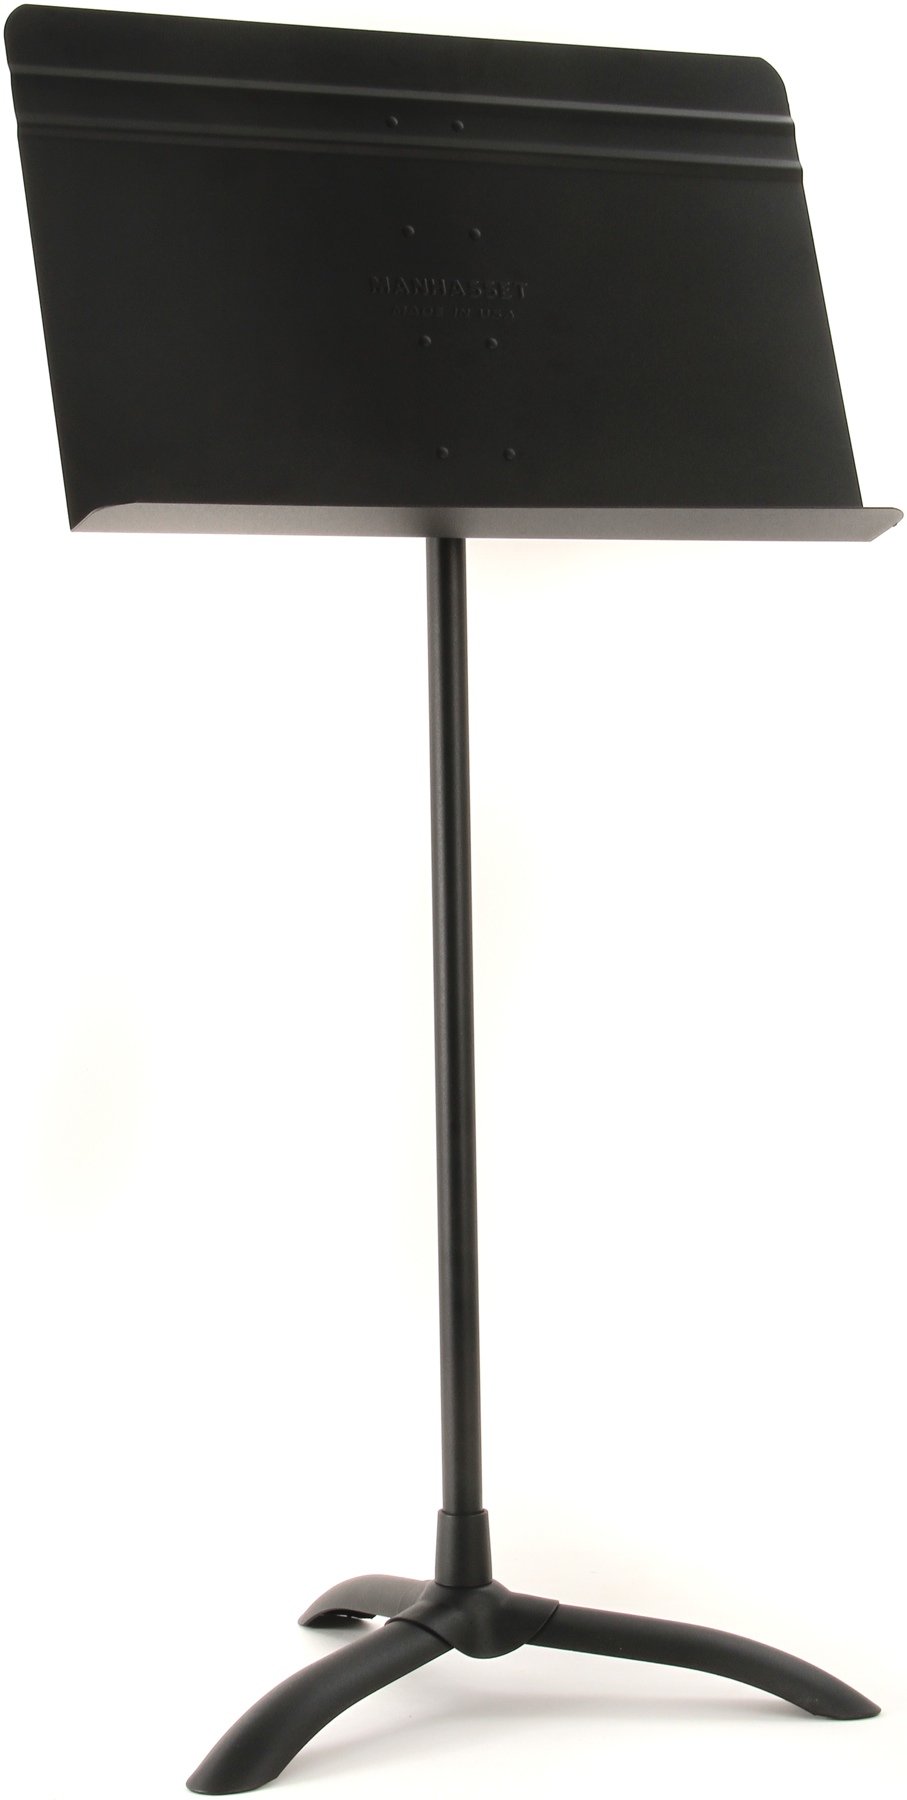 Manhasset 48 Symphony Stand Individually Boxed